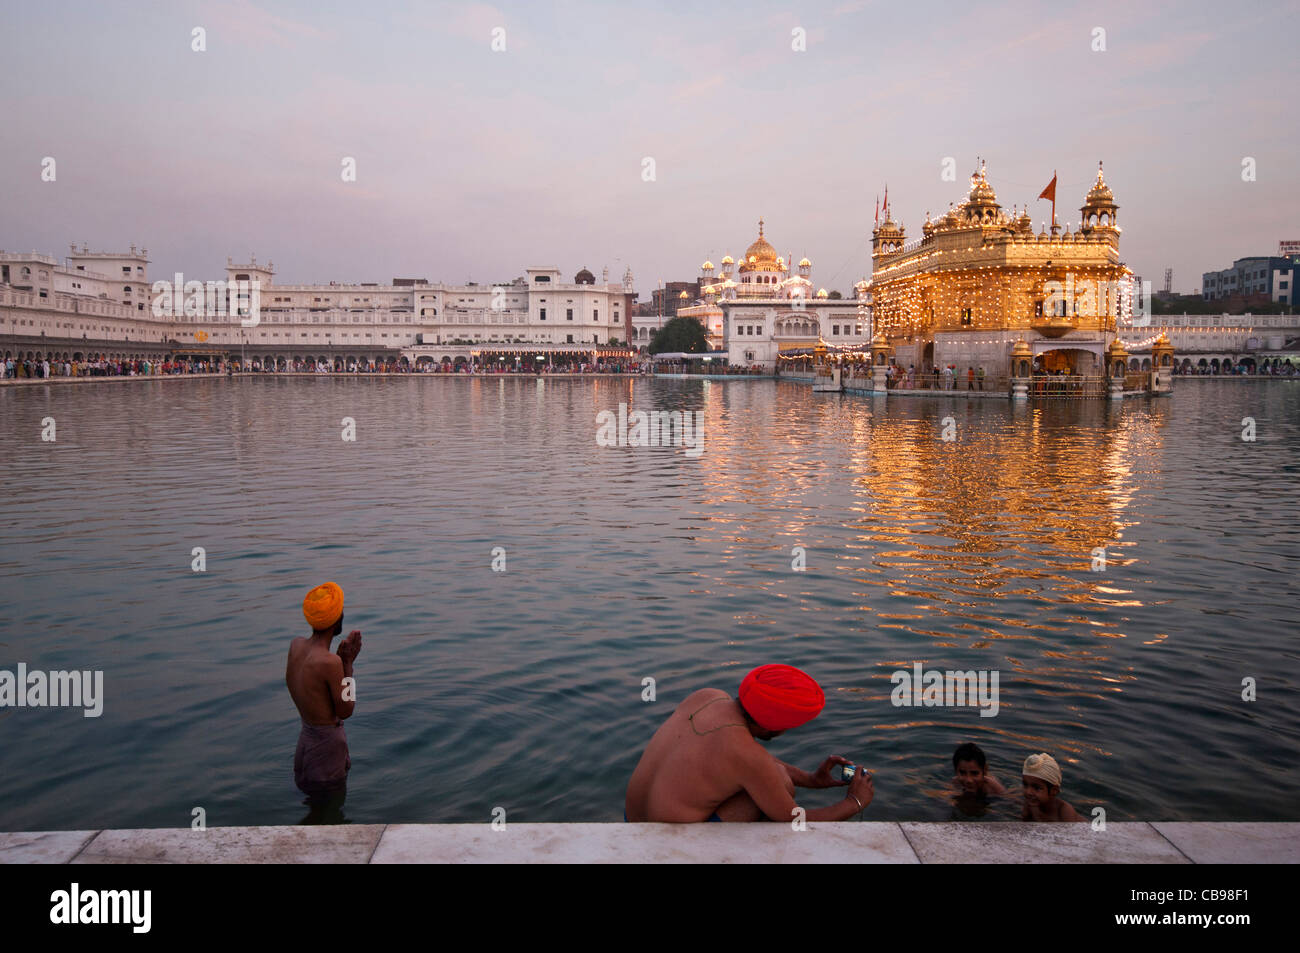 Ritual bathing at Amritsar Golden temple in Punjab, India. A man prays while another takes a photograph of his children. Stock Photo